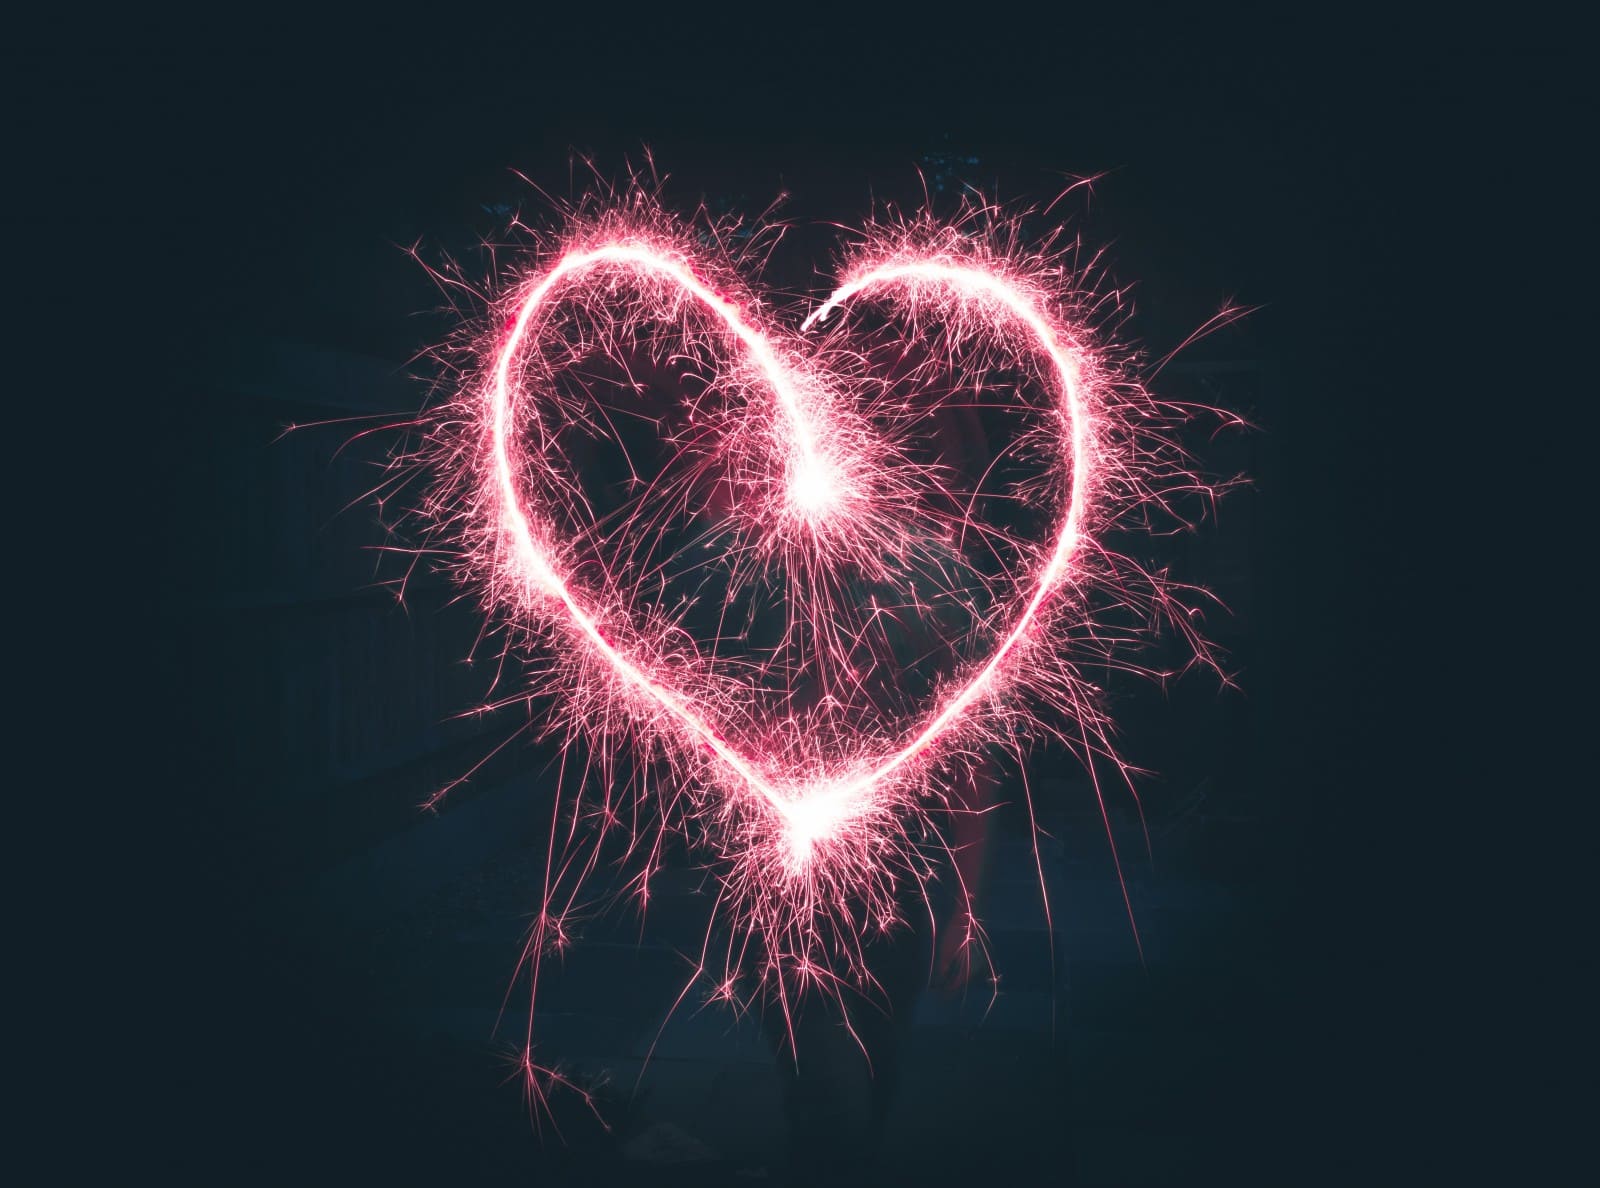 Beautiful Images of Hearts - 240 High-Quality Photos for Free